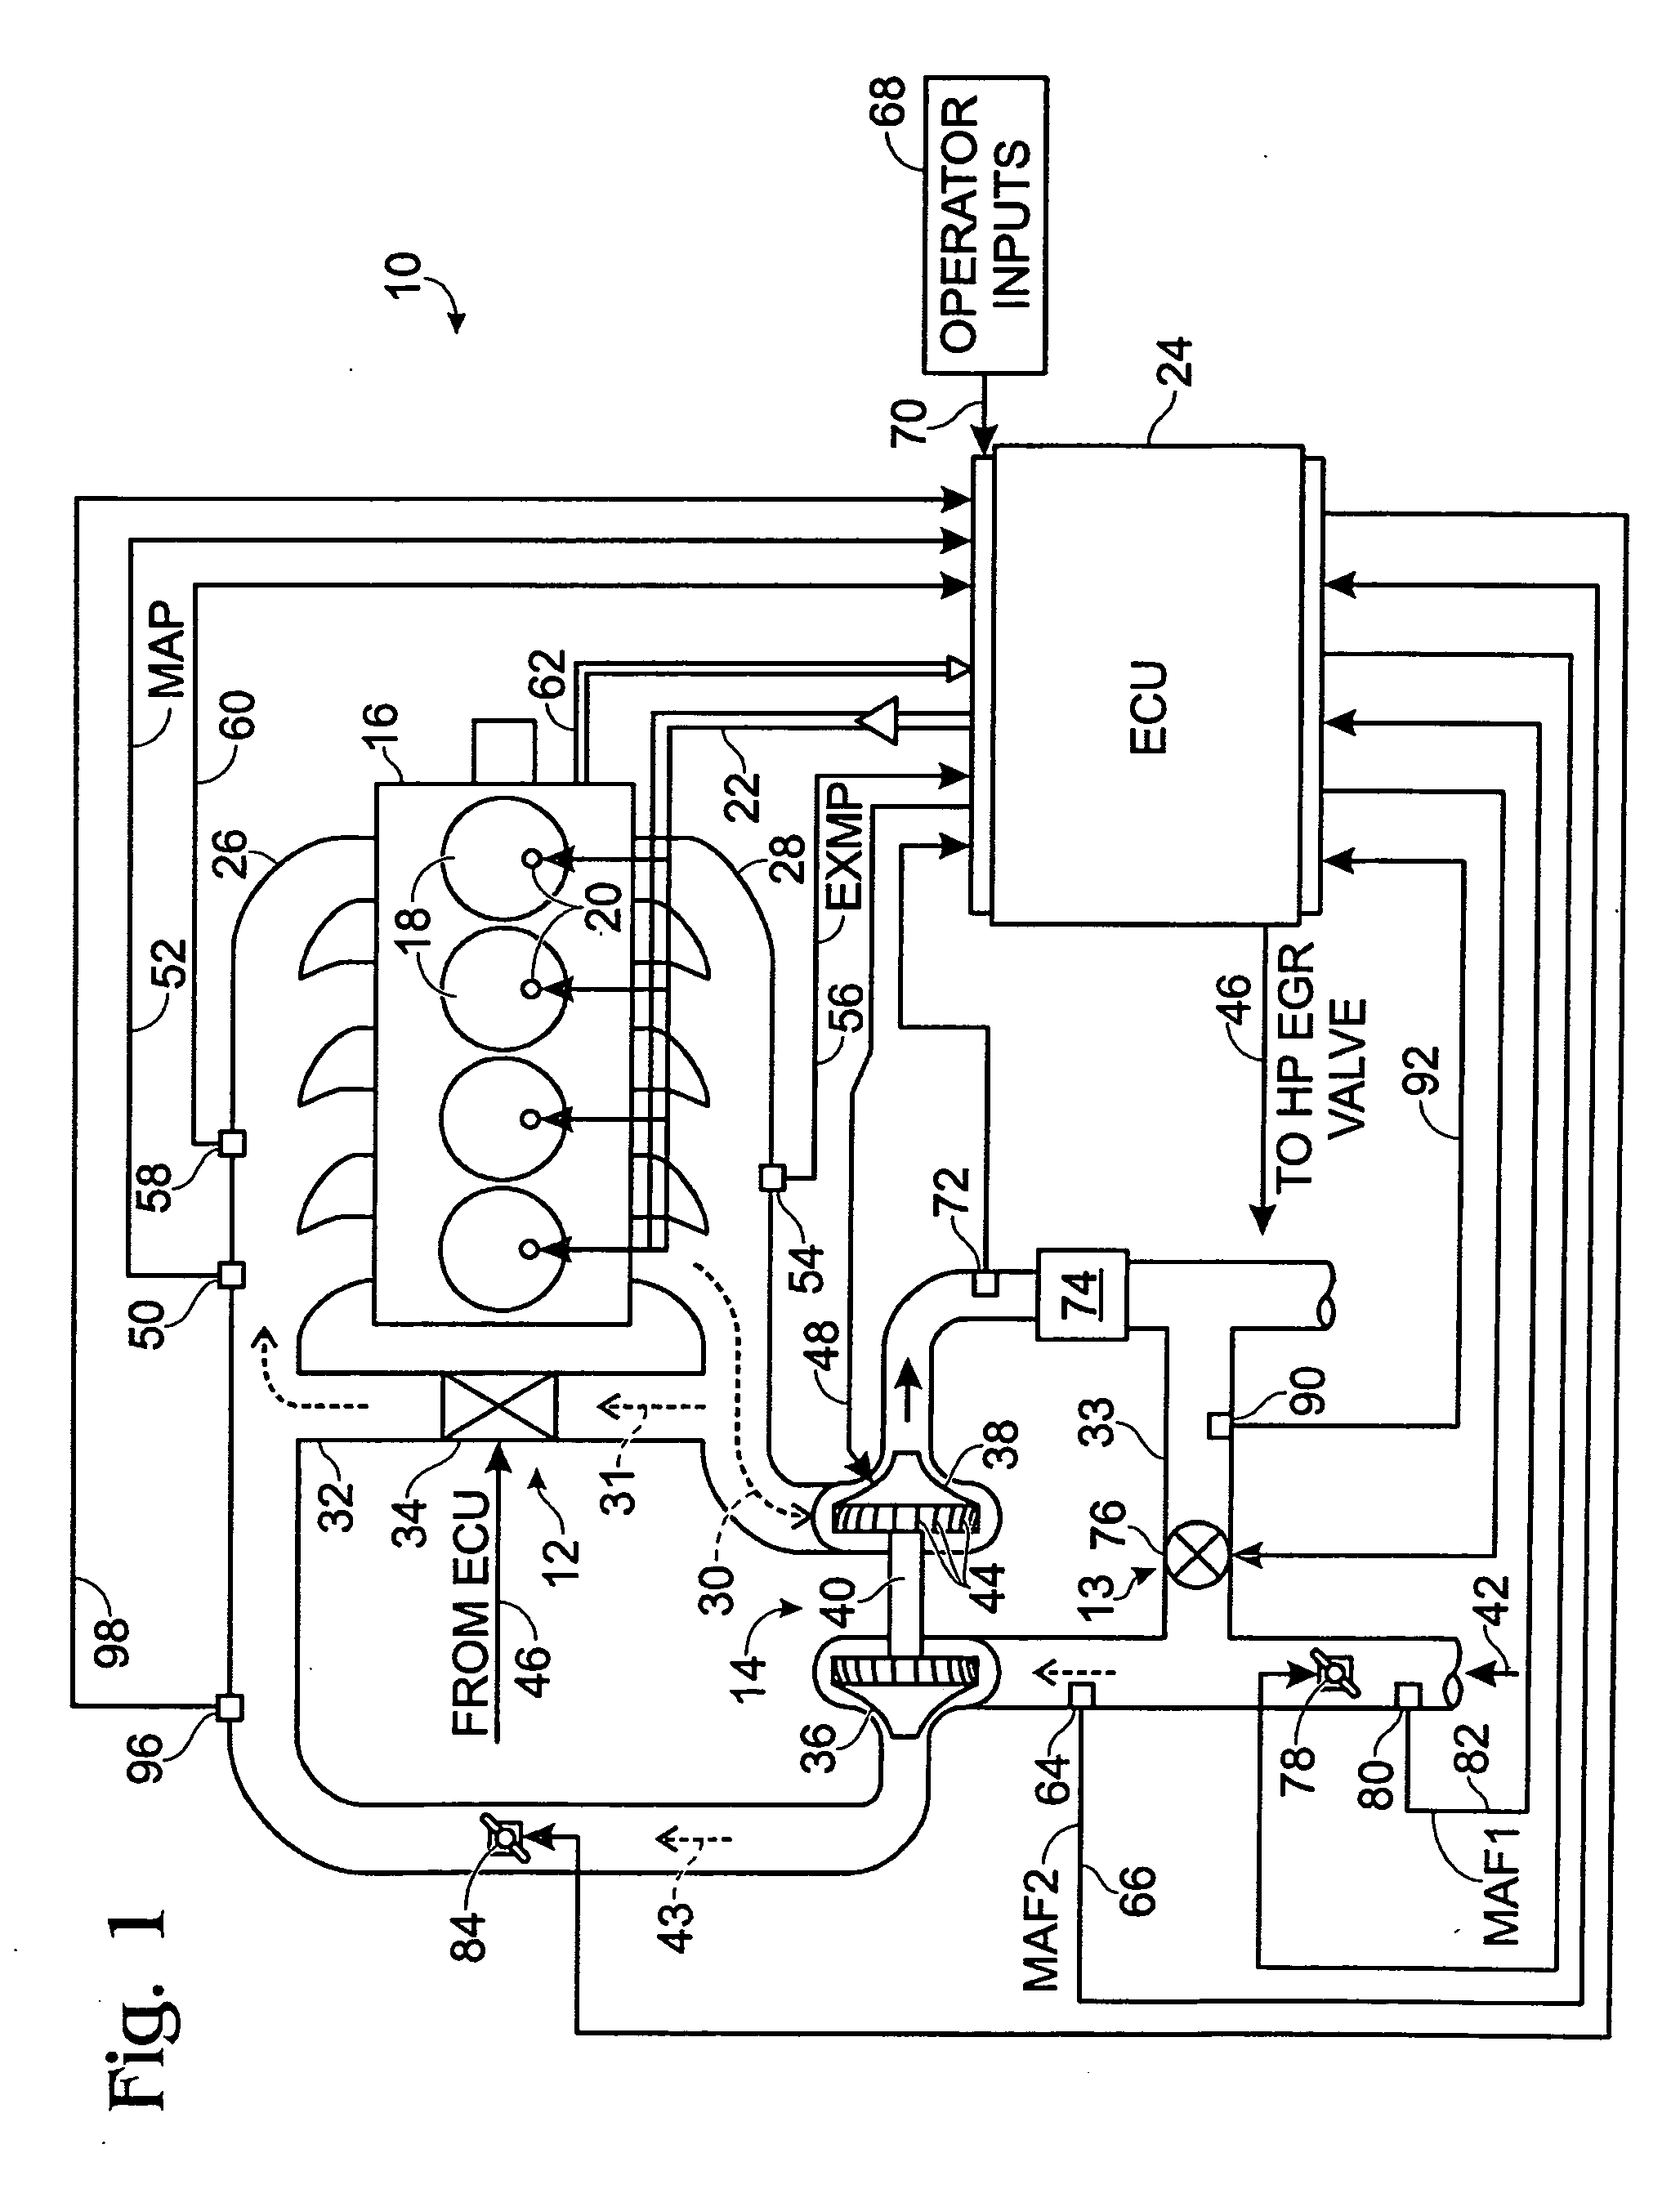 System and method for high pressure and low pressure exhaust gas recirculation control and estimation